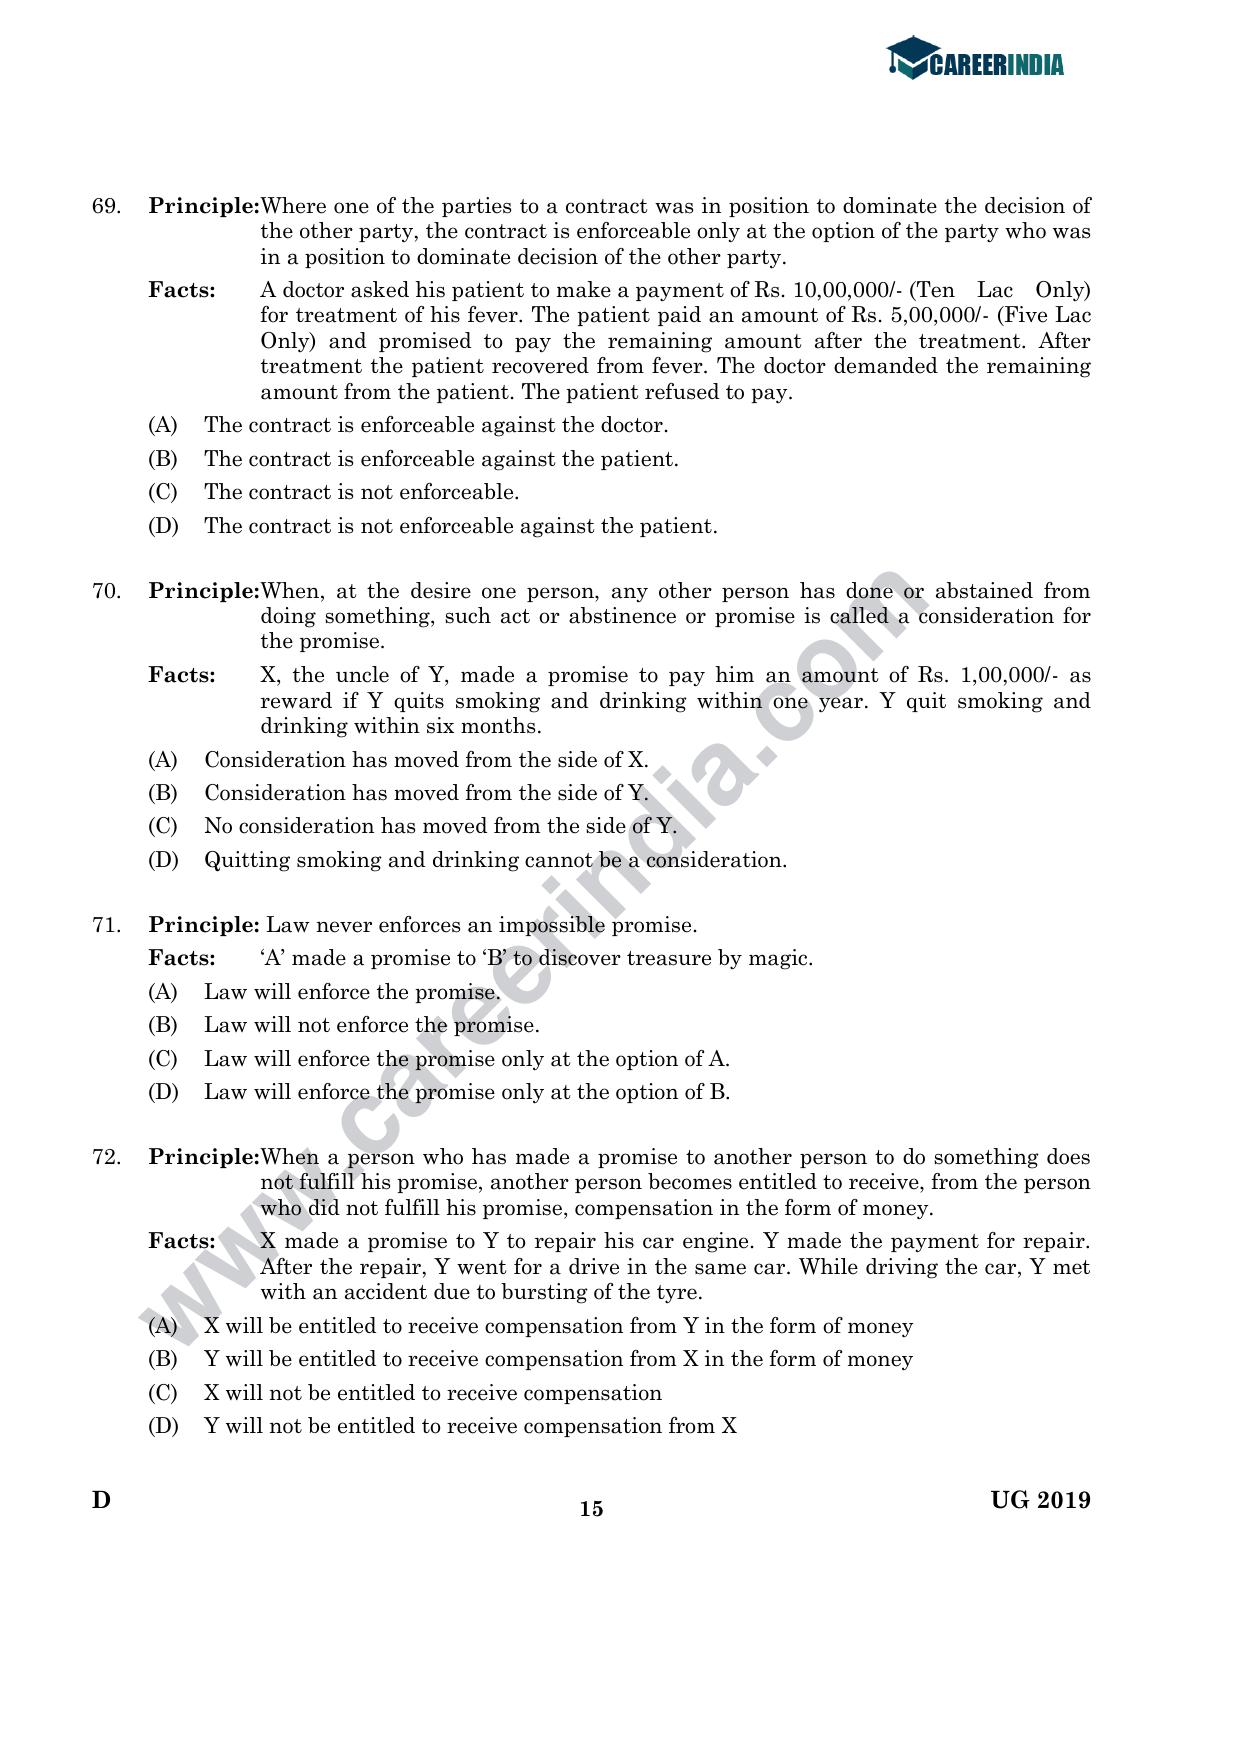 CLAT 2019 UG Logical-Reasoning Question Paper - Page 14